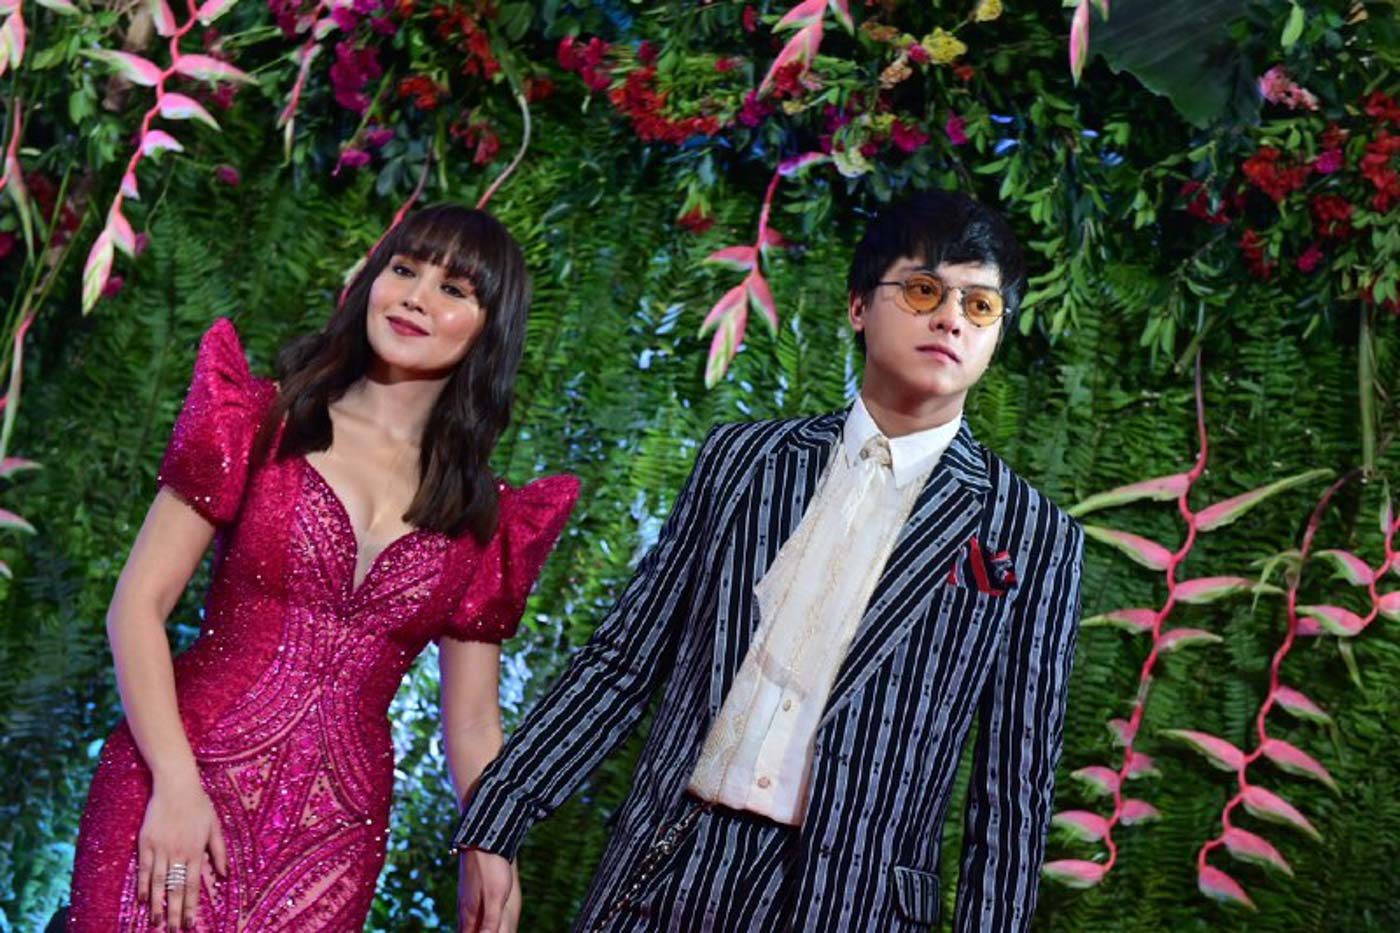 Kathryn Bernardo, Daniel Padilla to reunite with Cathy Garcia-Molina in new movie ‘After Forever’